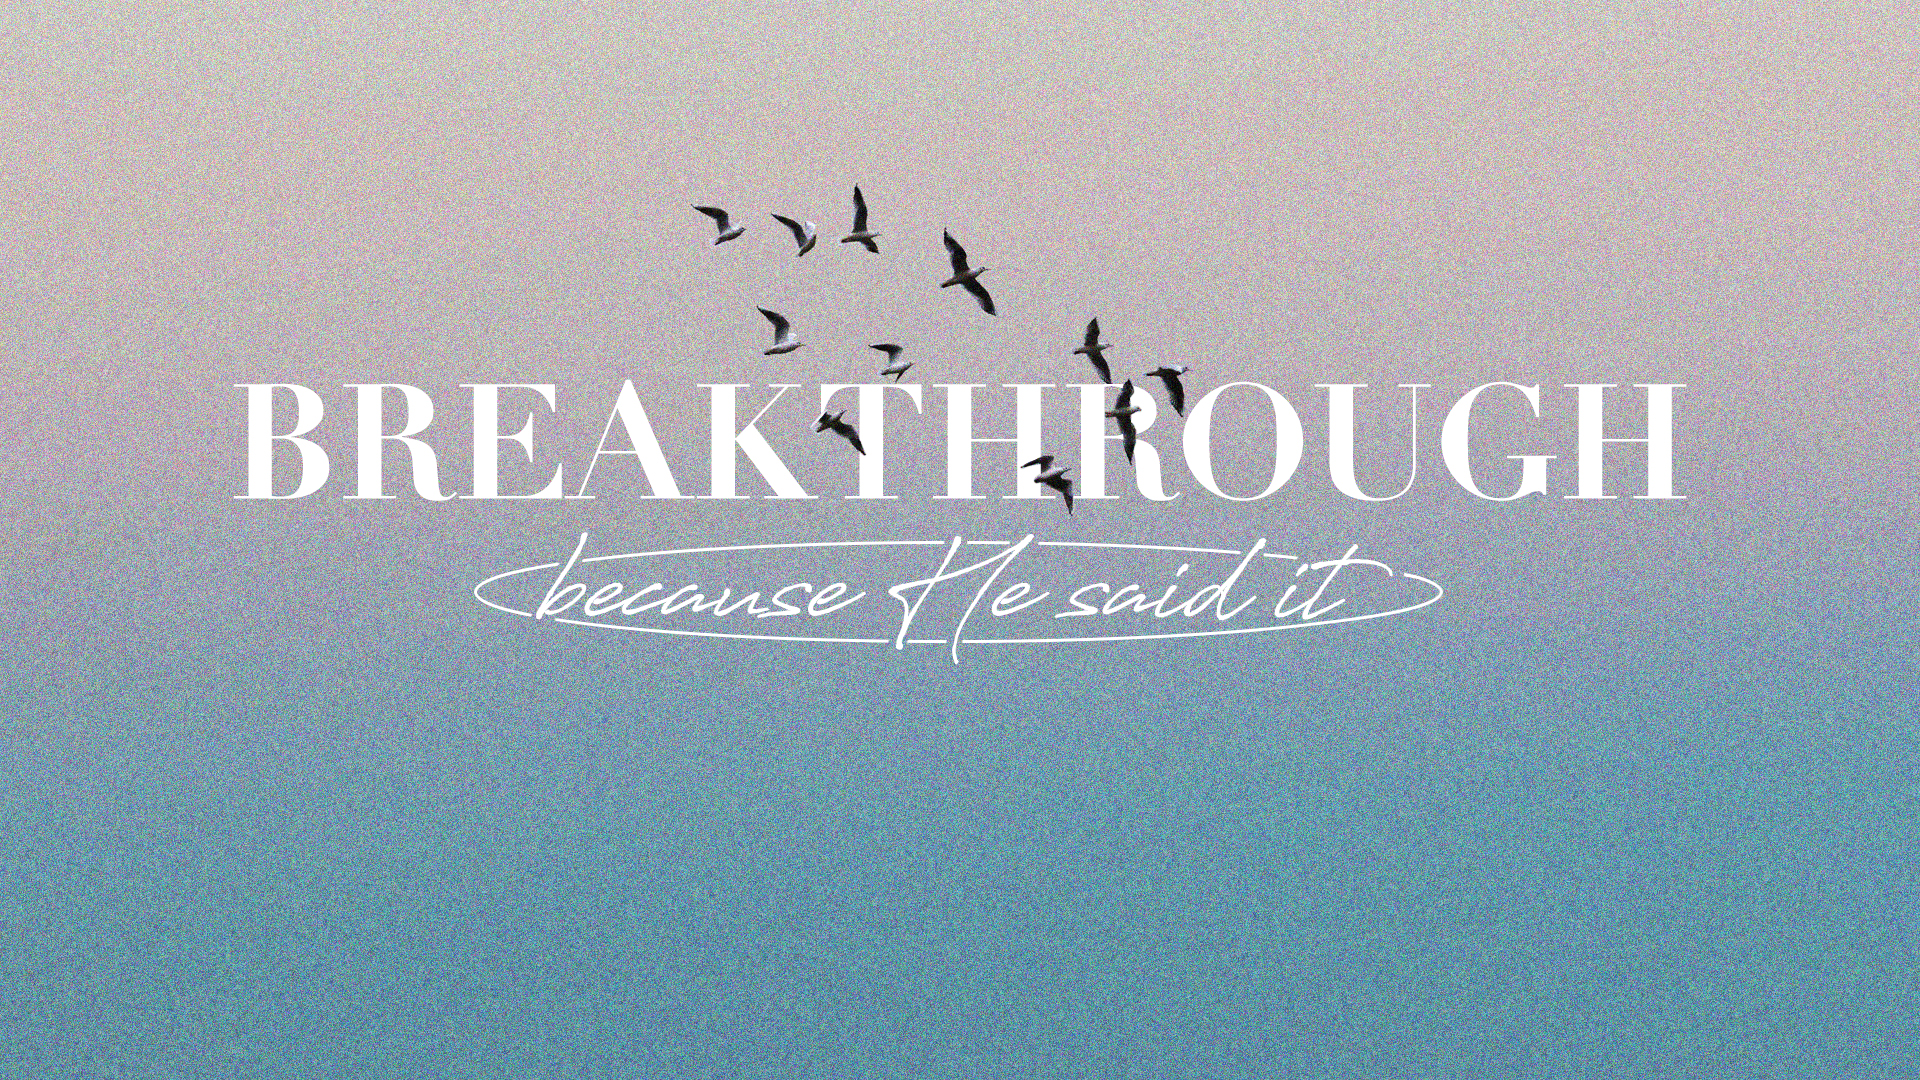 Breakthrough - Because He Said It